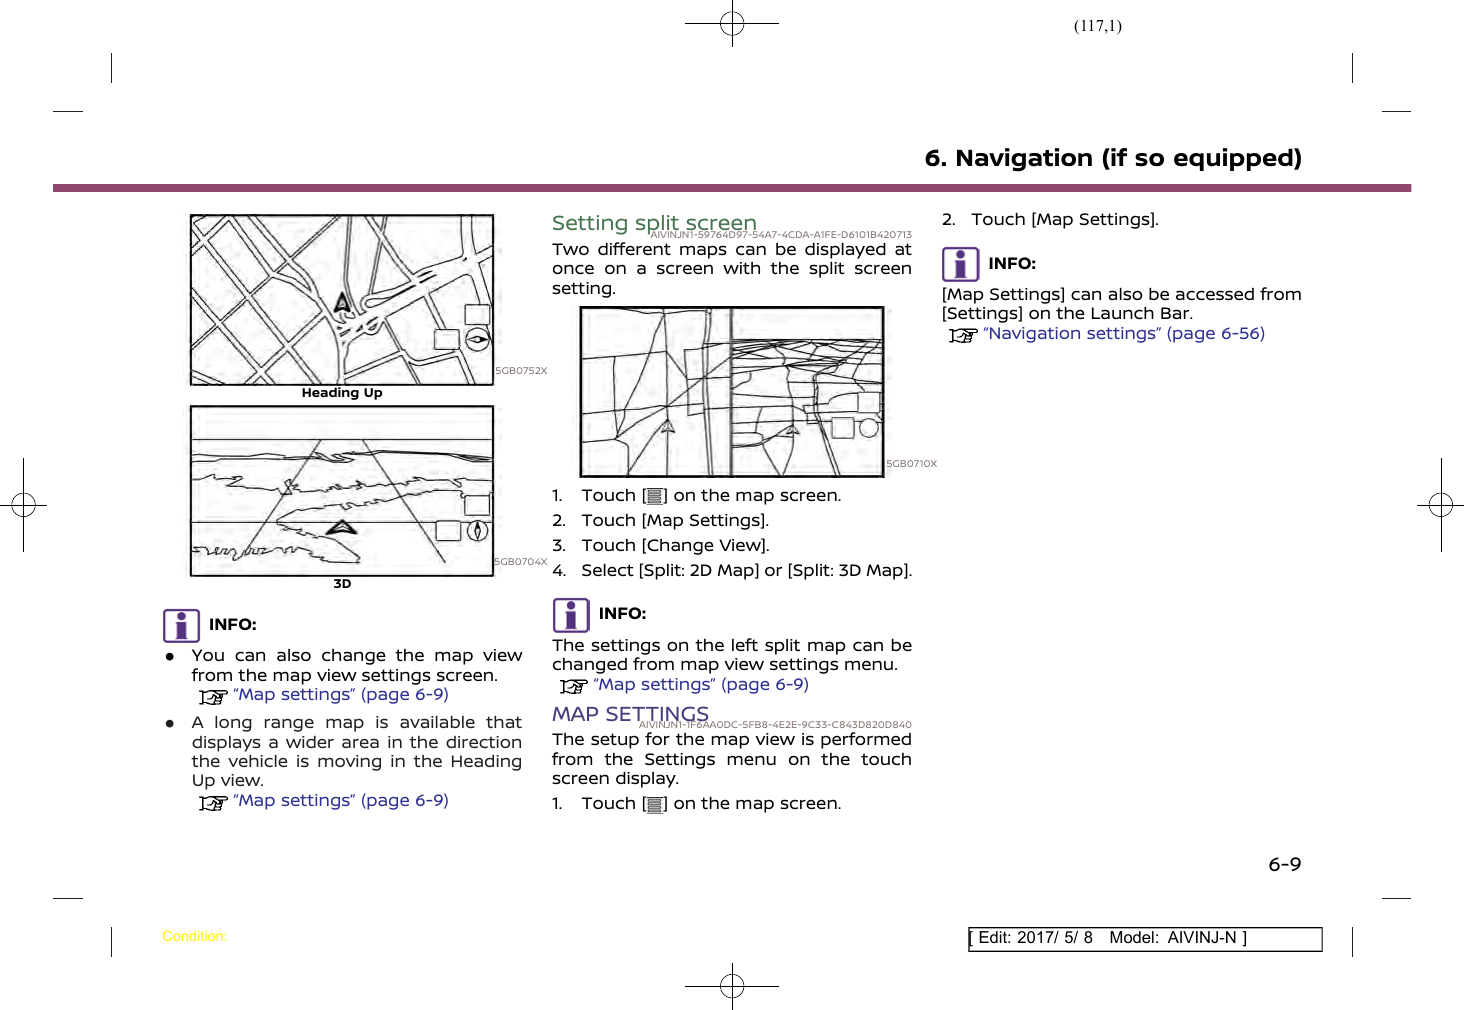 Page 117 of Robert Bosch Car Multimedia AIVICMFB0 Navigation System with Bluetooth and WLAN User Manual